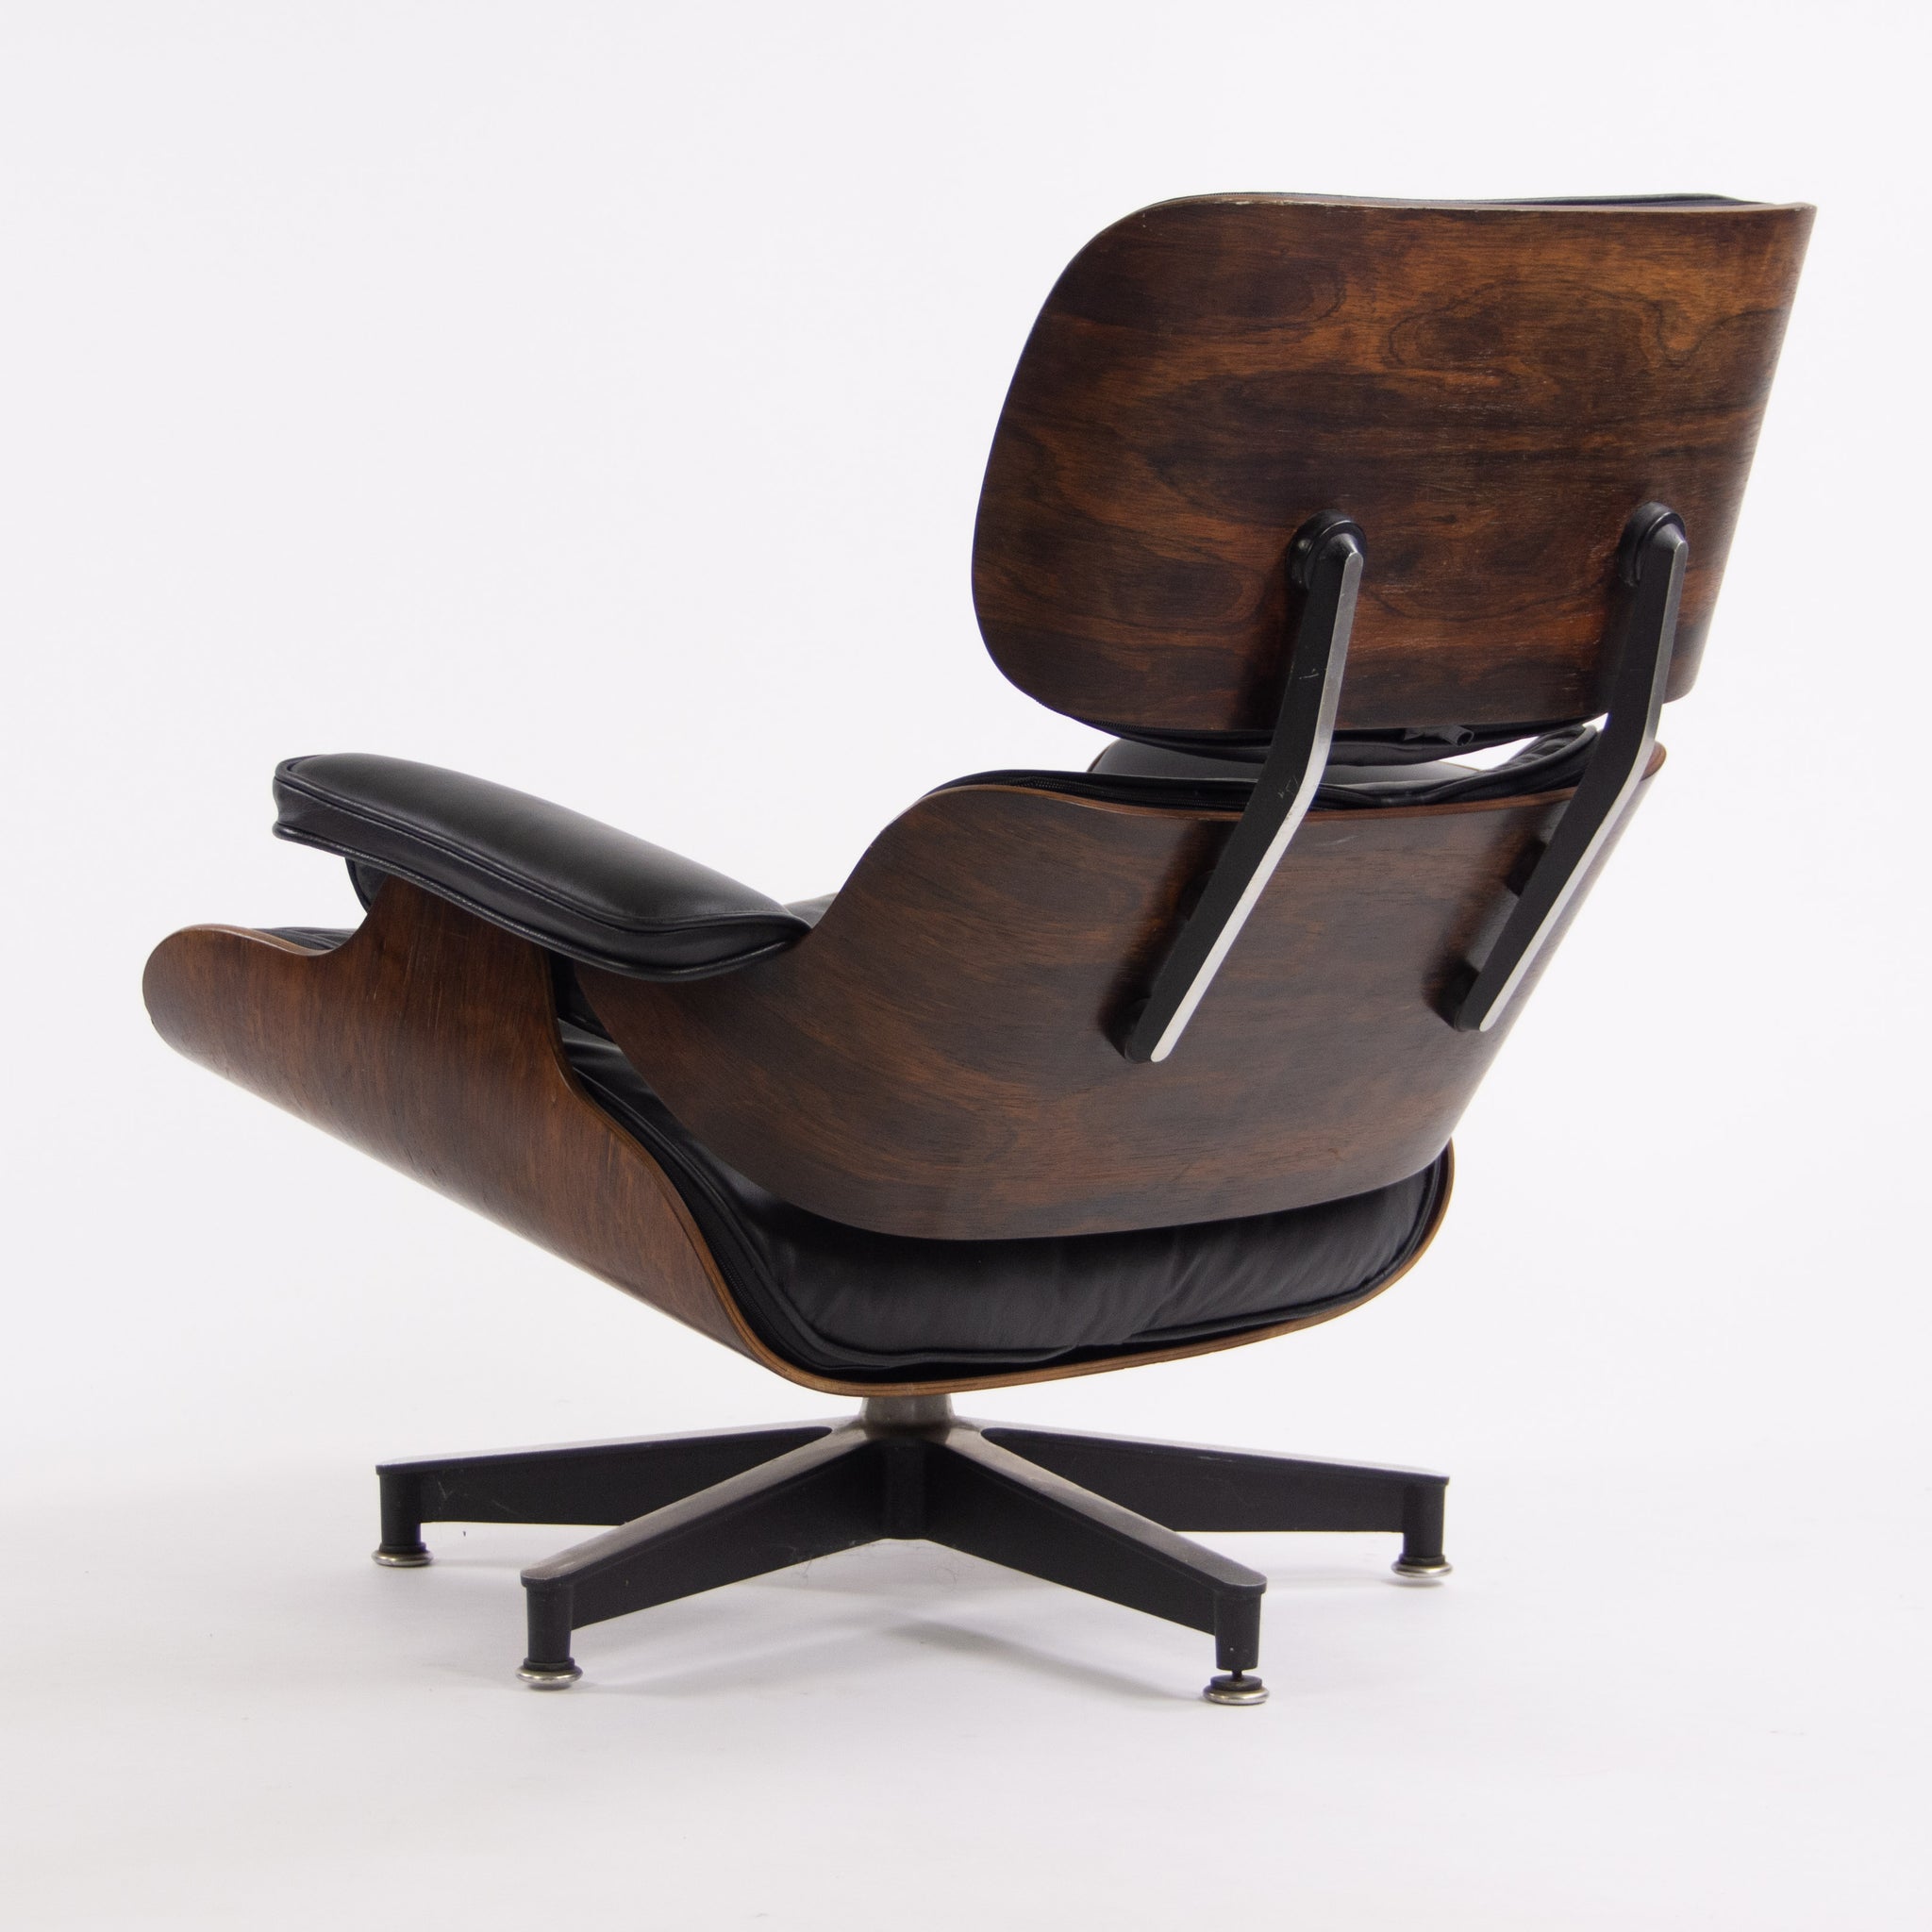 SOLD 1950's Herman Miller Eames Lounge Chair & Ottoman Rosewood 670 671 New Leather